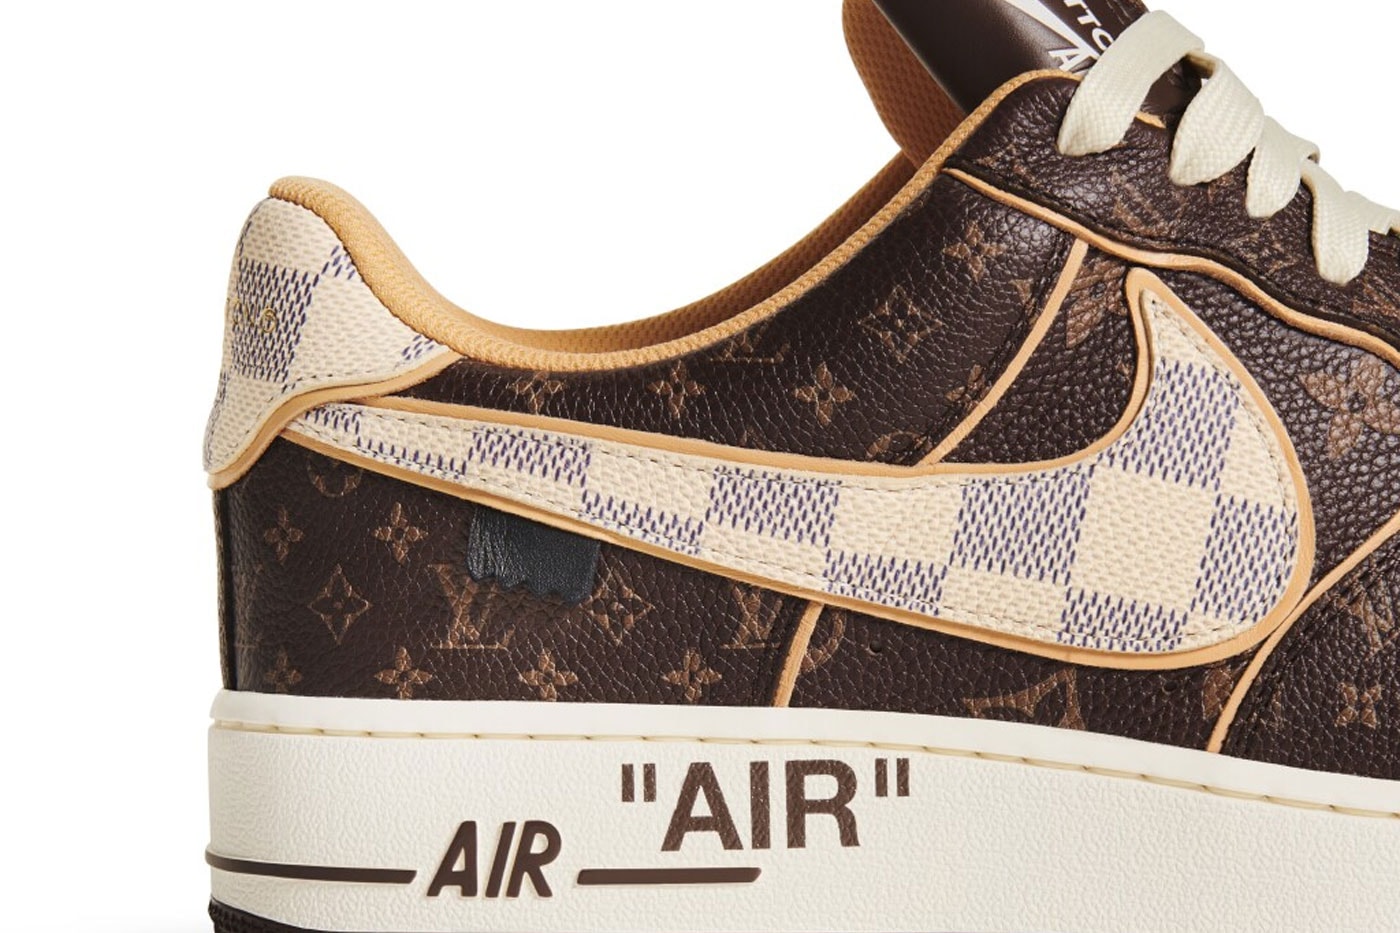 The Louis Vuitton x Nike Air Force 1 by Virgil Abloh Sneaker Is Currently Going for $90,000 USD sneakers sotheby's auctions lv monogram air bespoke